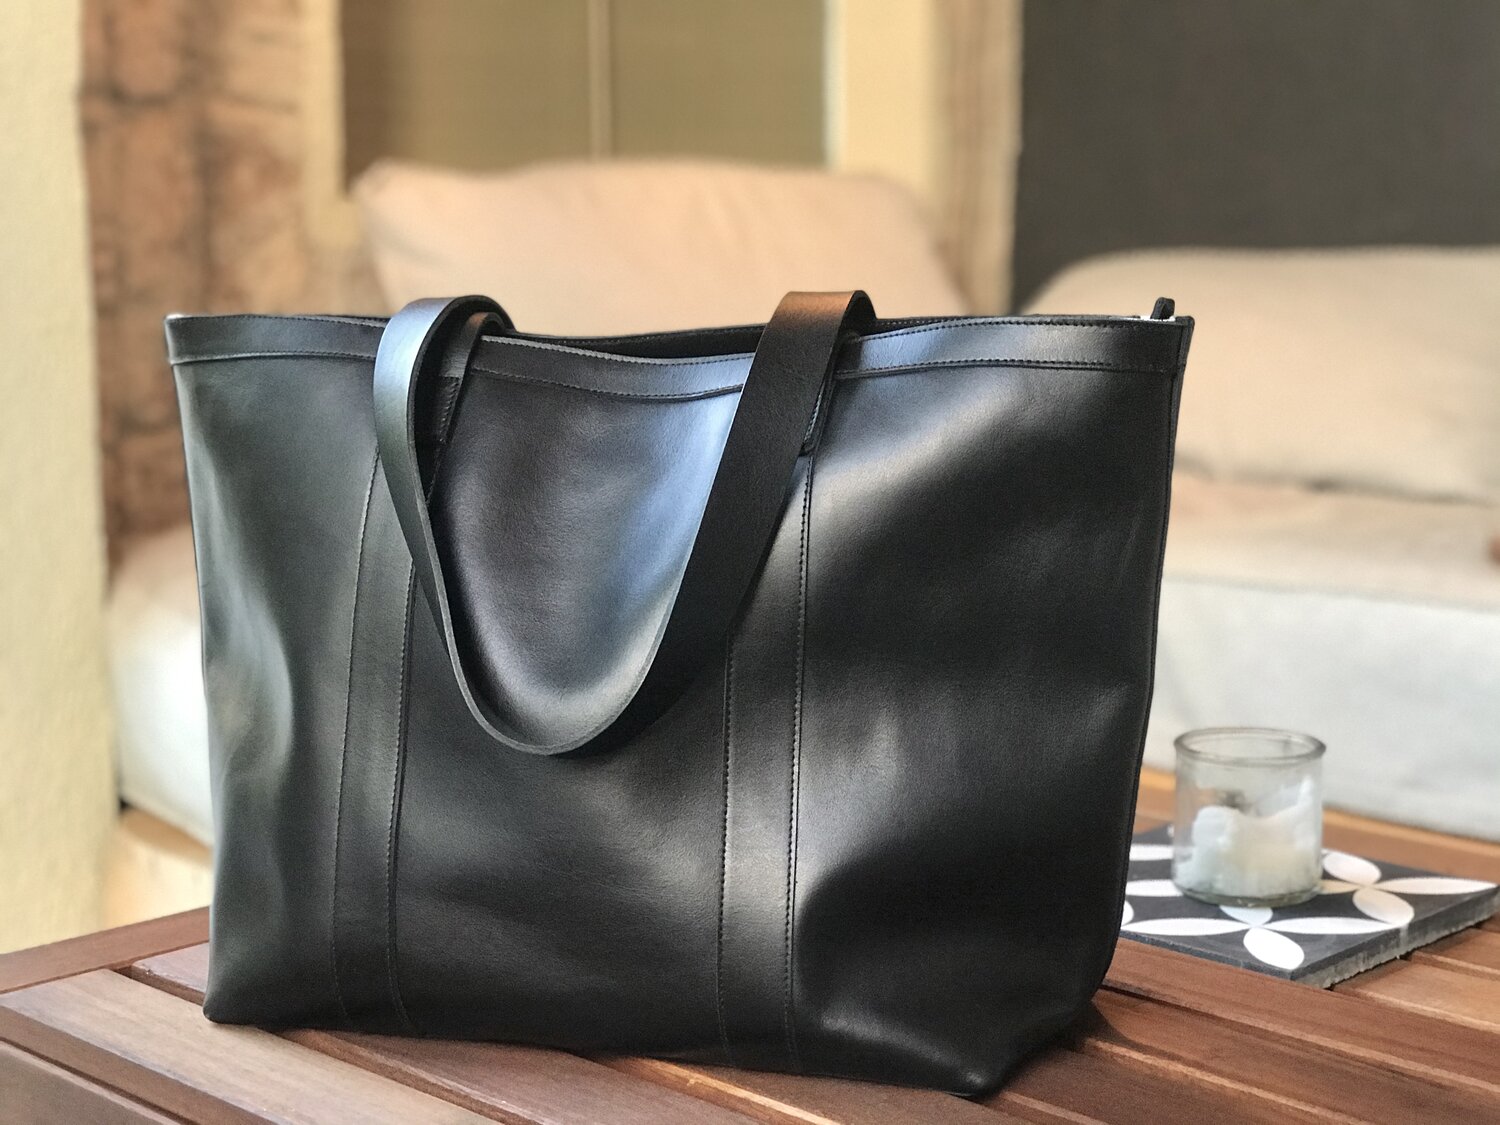 Small Crossbody bag in Black Leather with outside pocket and Zipper.  Handmade. — Vermut Atelier